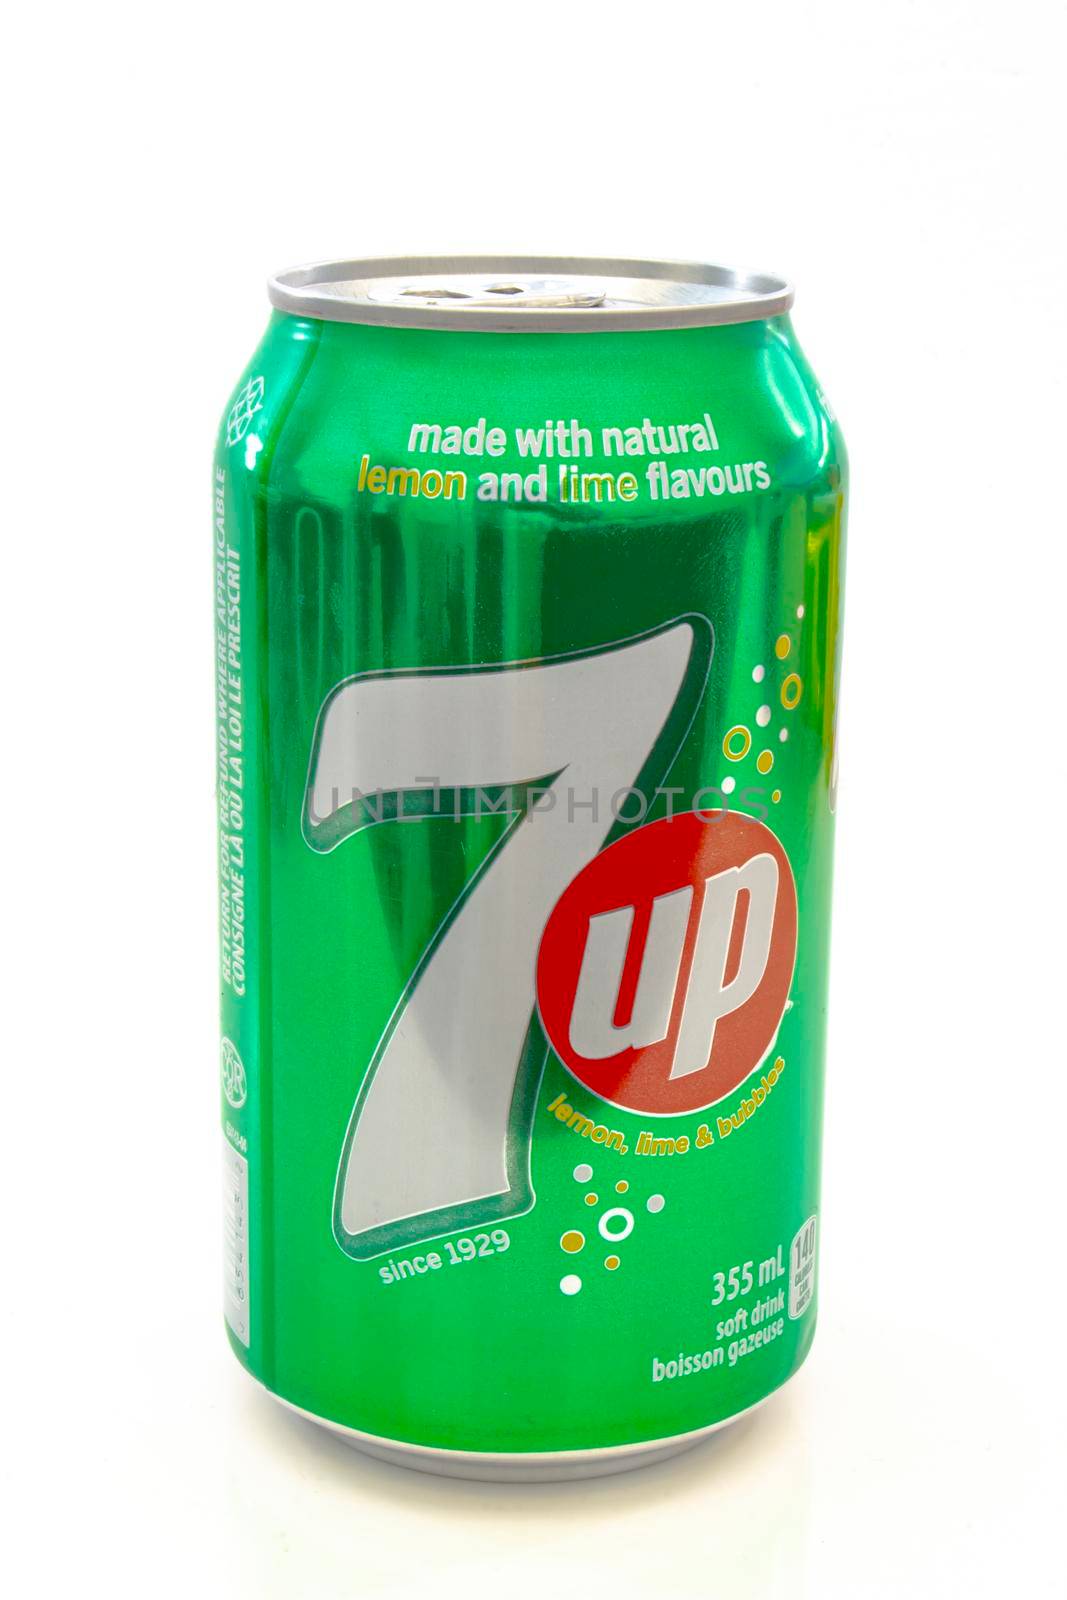 Calgary Alberta, Canada. May 1, 2021. A can of 7up an American brand of lemon-lime-flavored non-caffeinated soft drink.